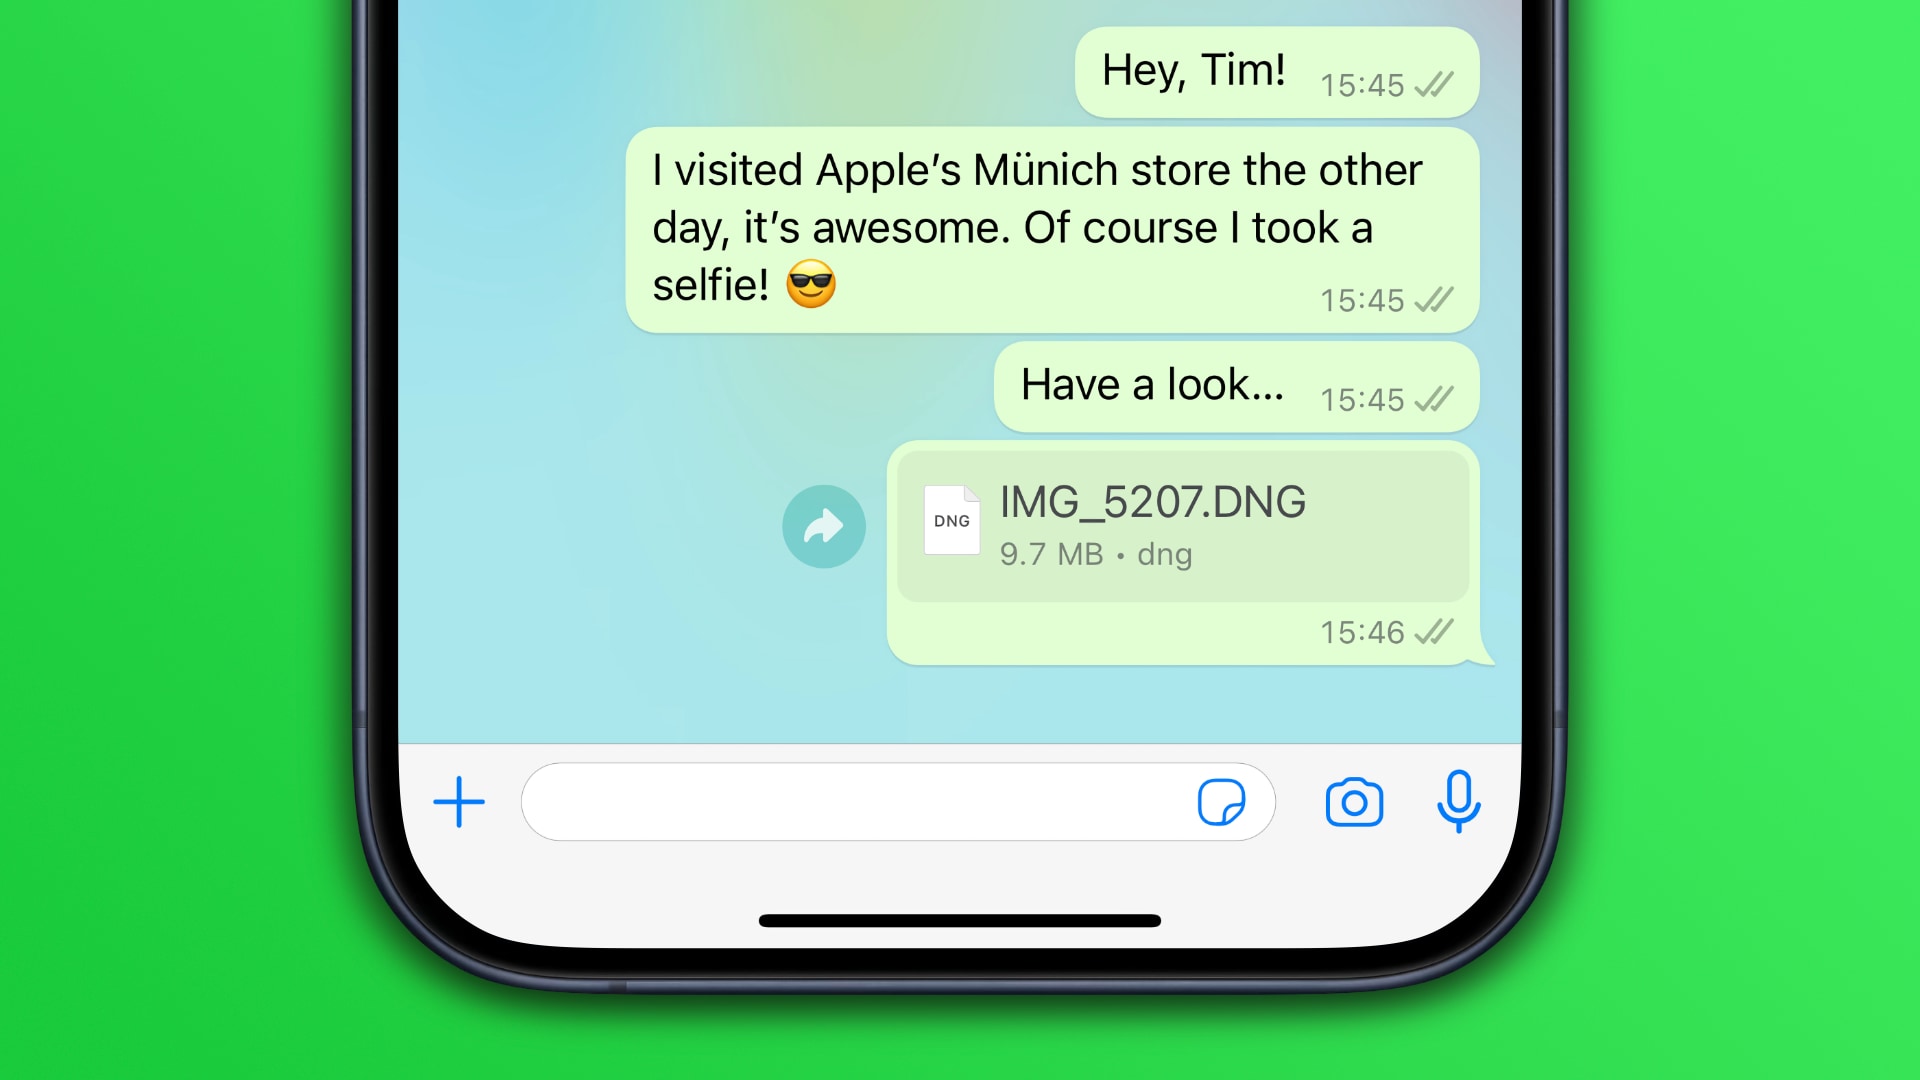 Example of a chat in the WhatsApp iPhone app with a full-resolution photo attachment